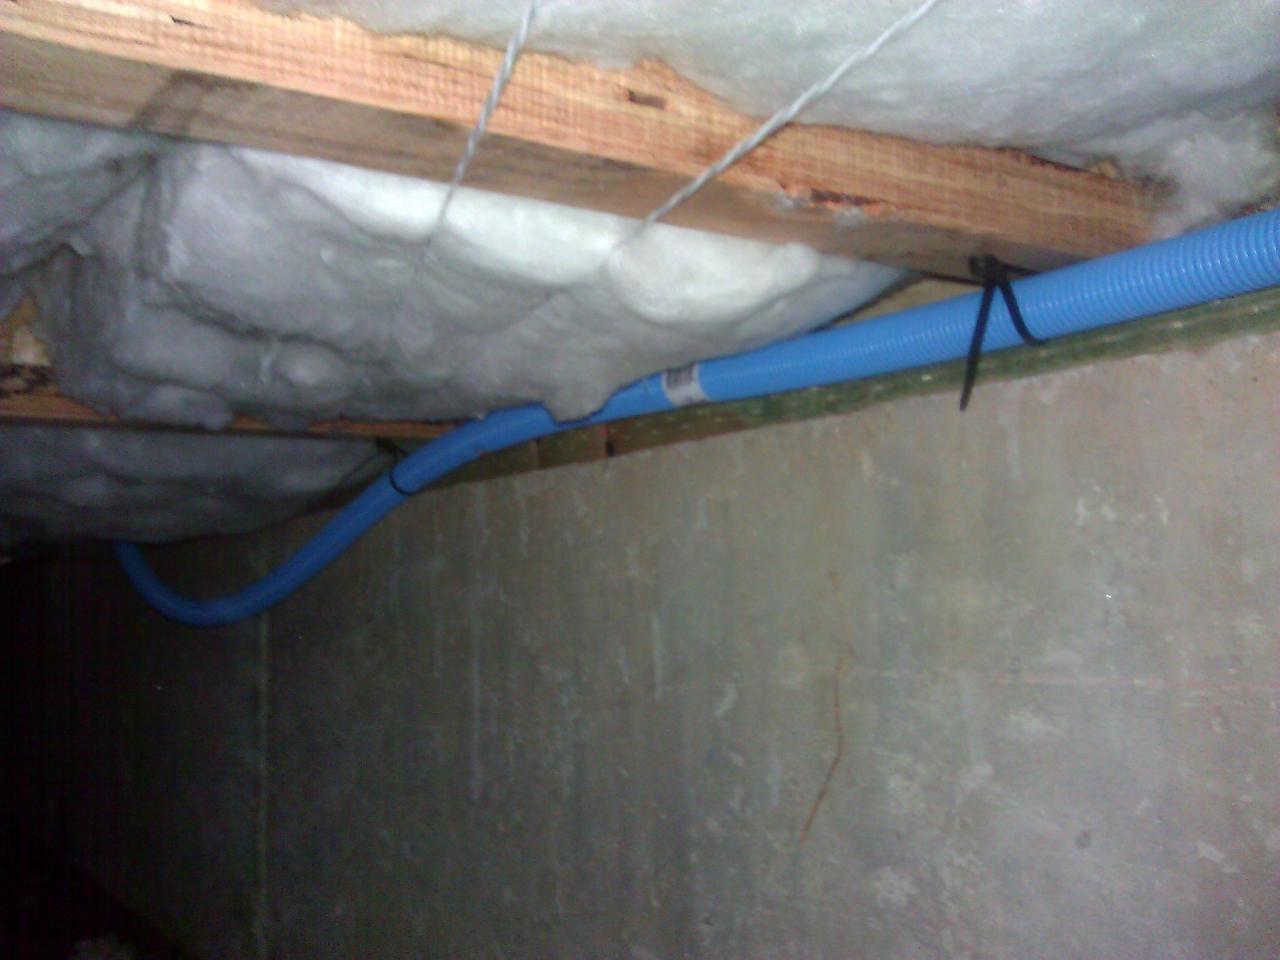 Strapping the conduit to the floor joists